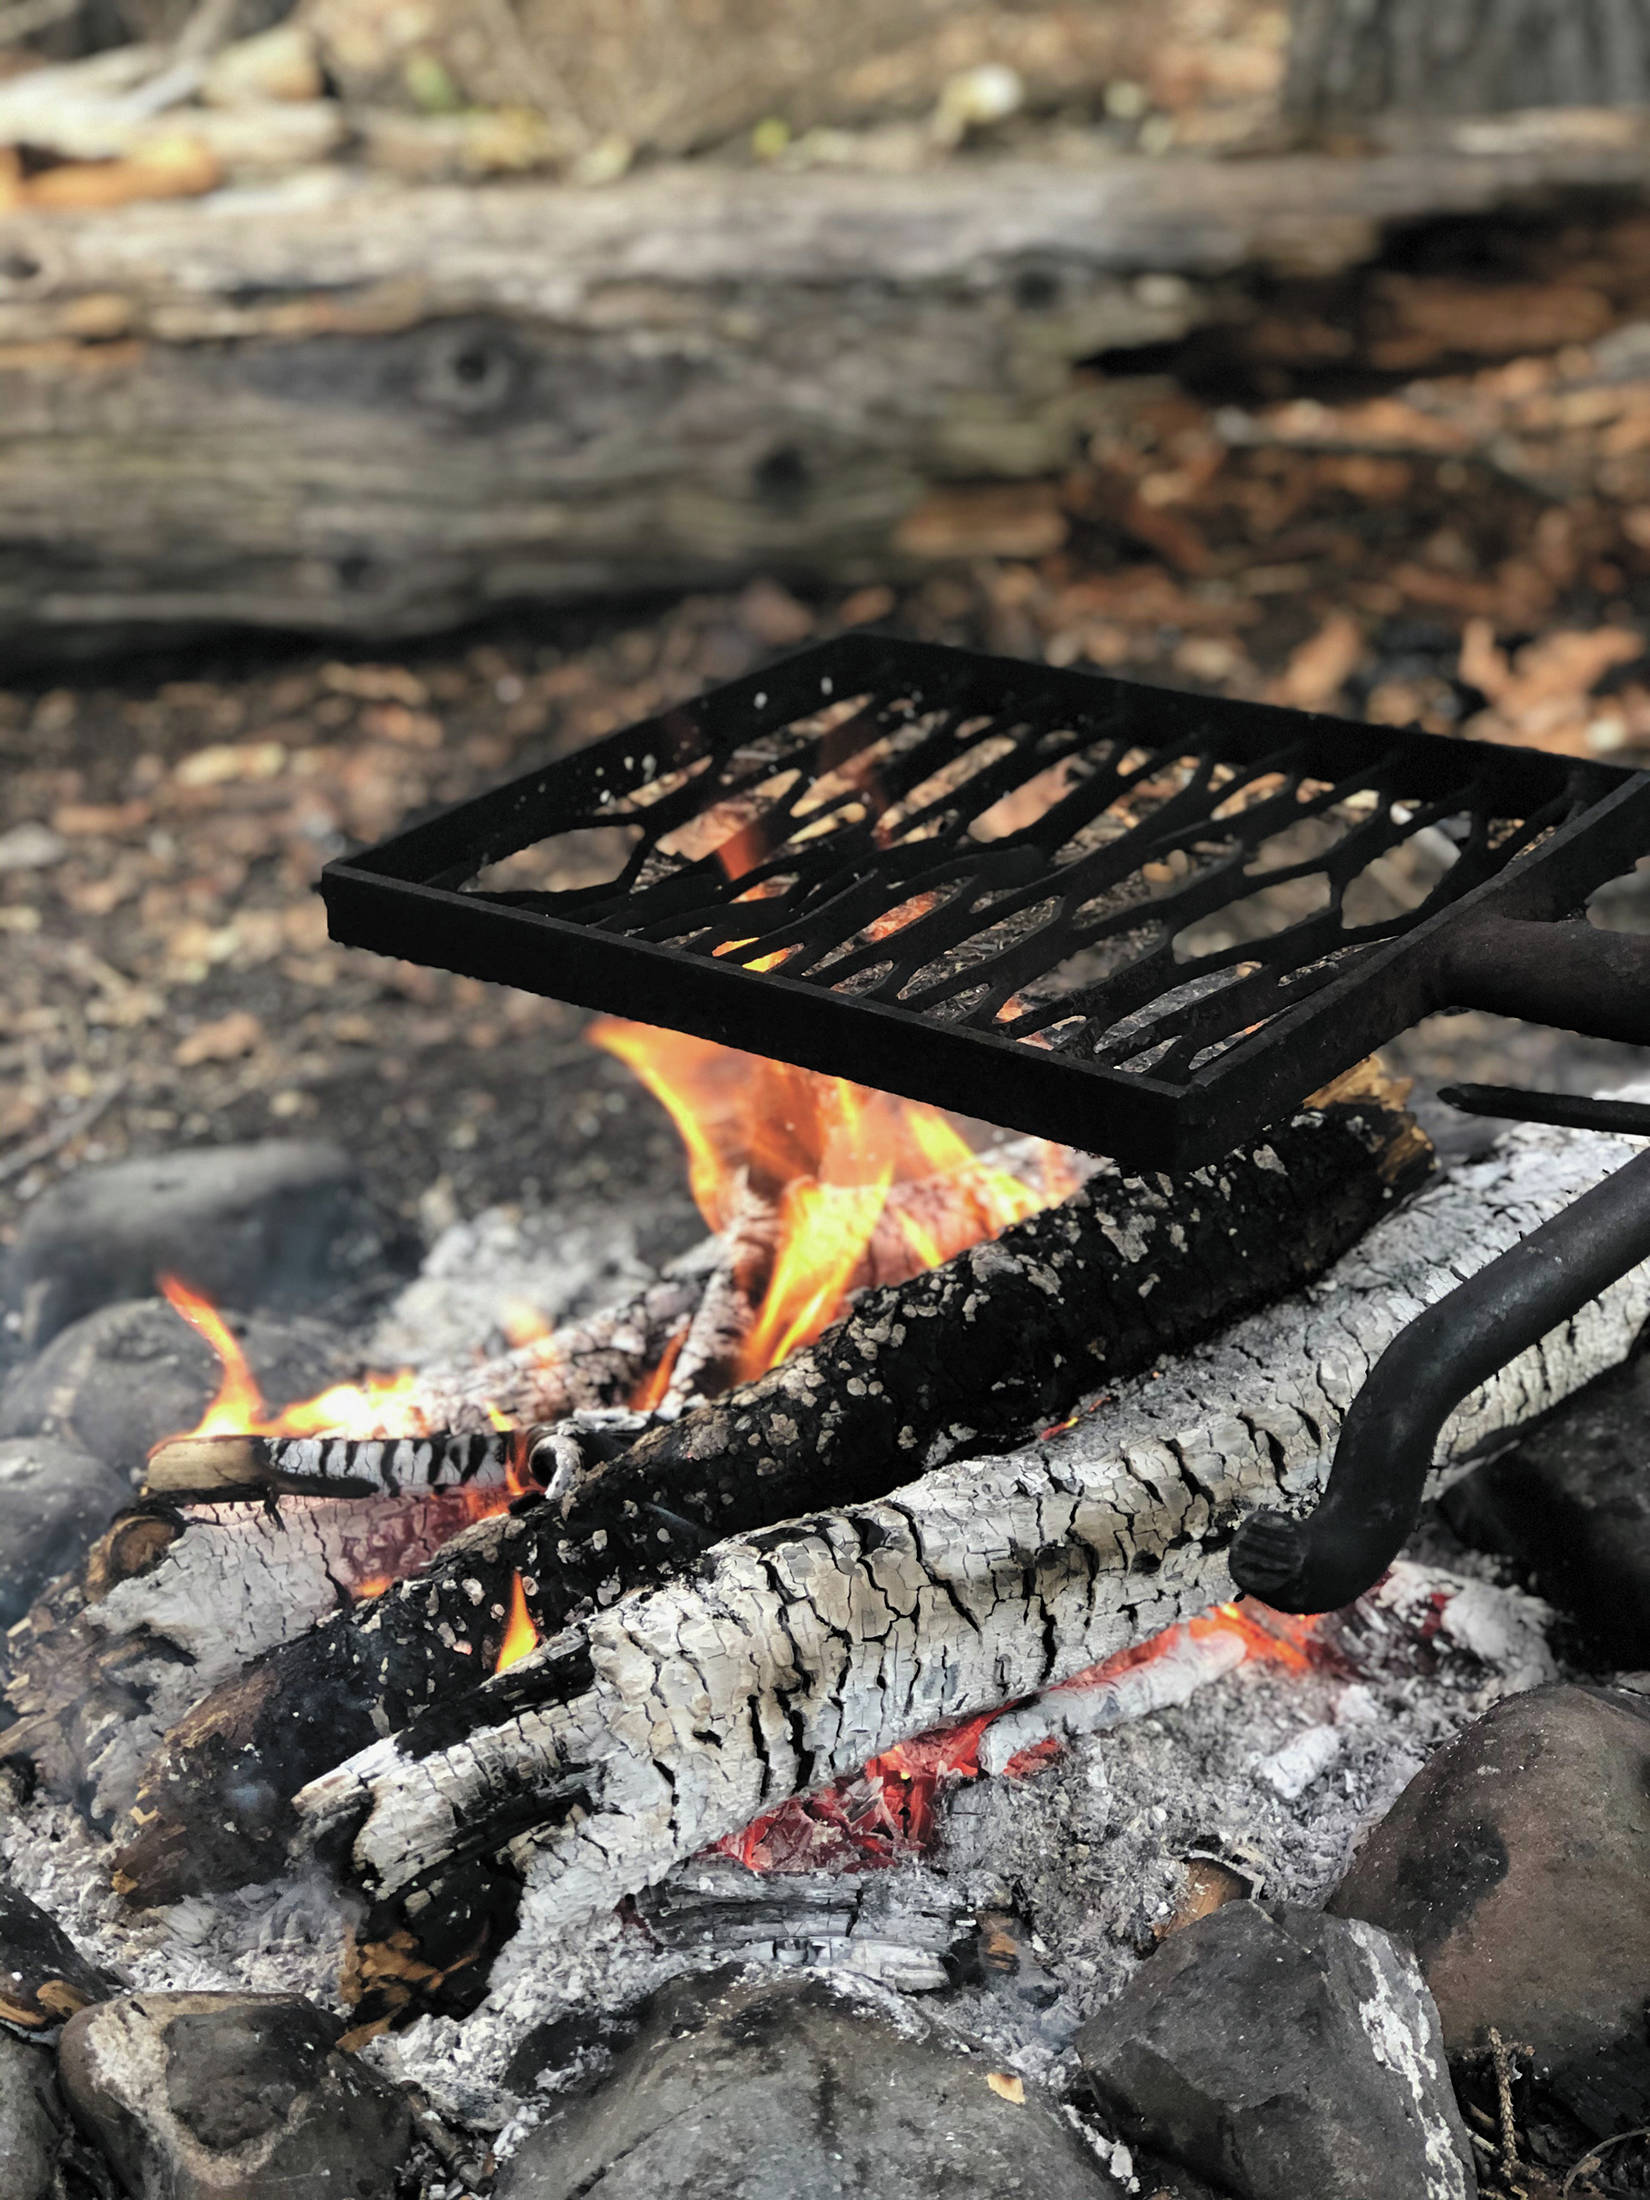 Embers ideal for cooking s’mores smolder away on June 27, 2020 at a campsite along the Resurrection Pass Trail in Cooper Landing, Alaska. (Photo by Megan Pacer/Homer News)